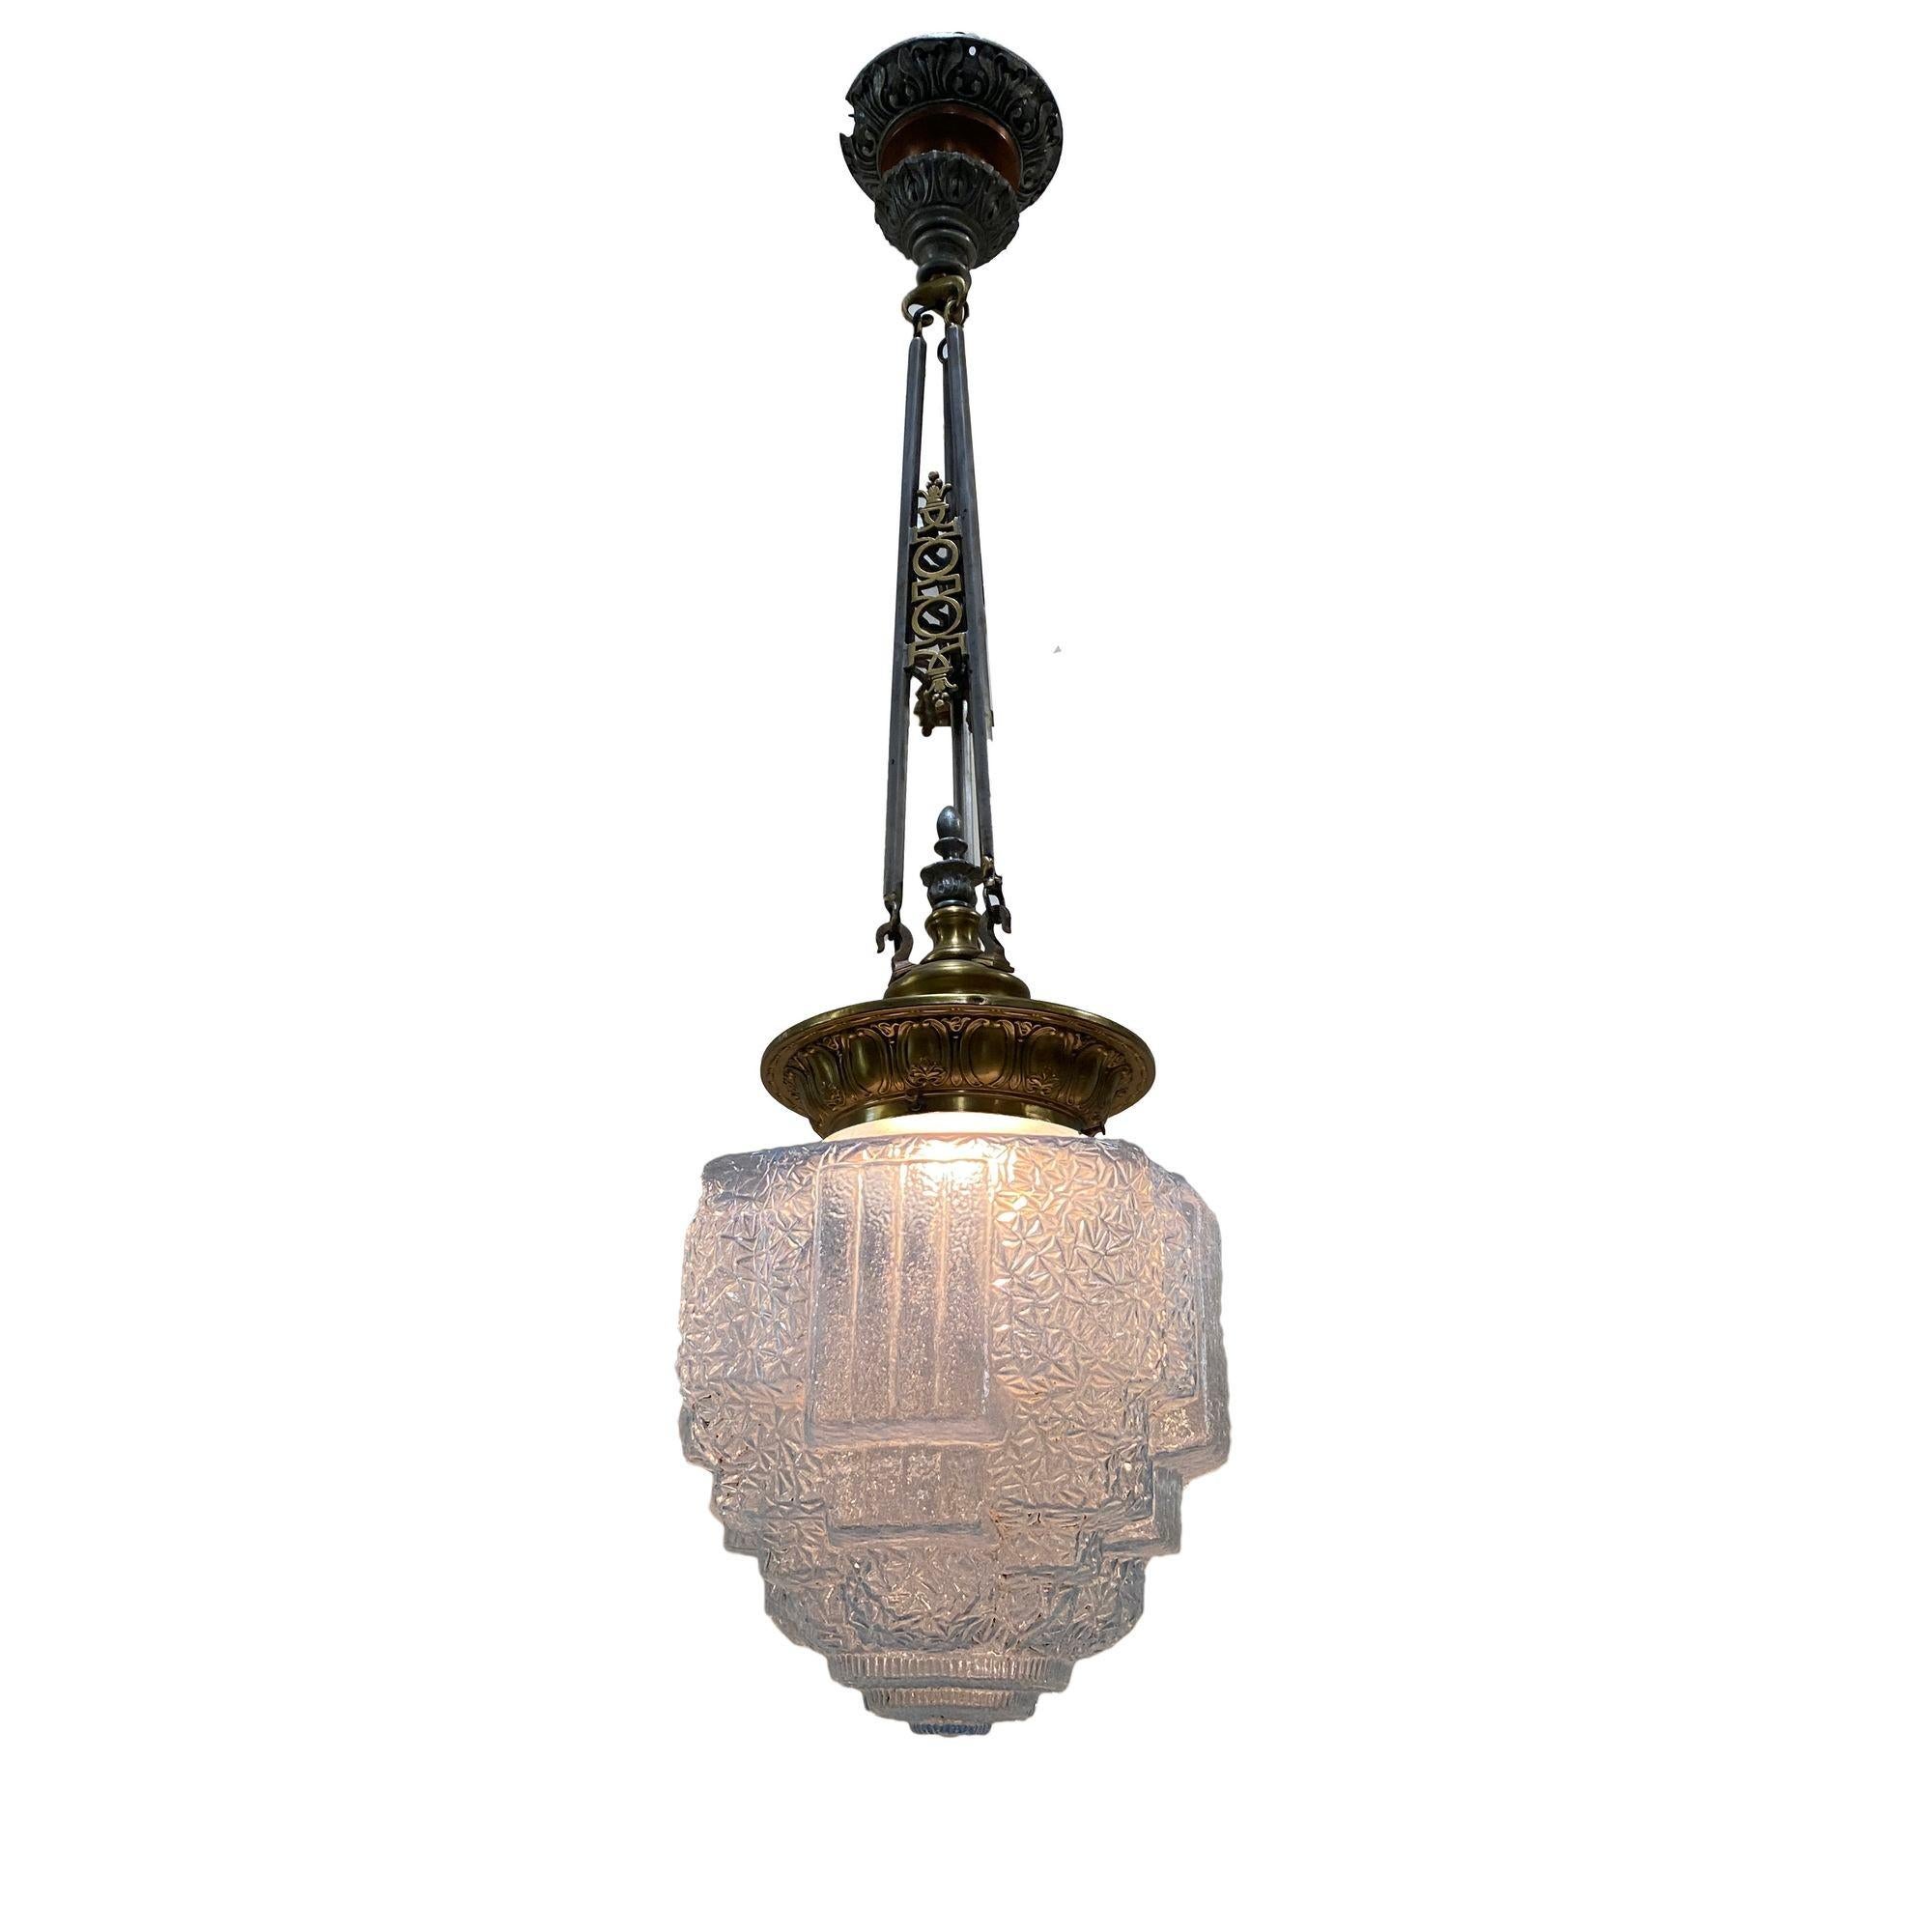 Set of 4 rare Empire Deco style ceiling pendants with stepped Blue Glass Art Deco globe.